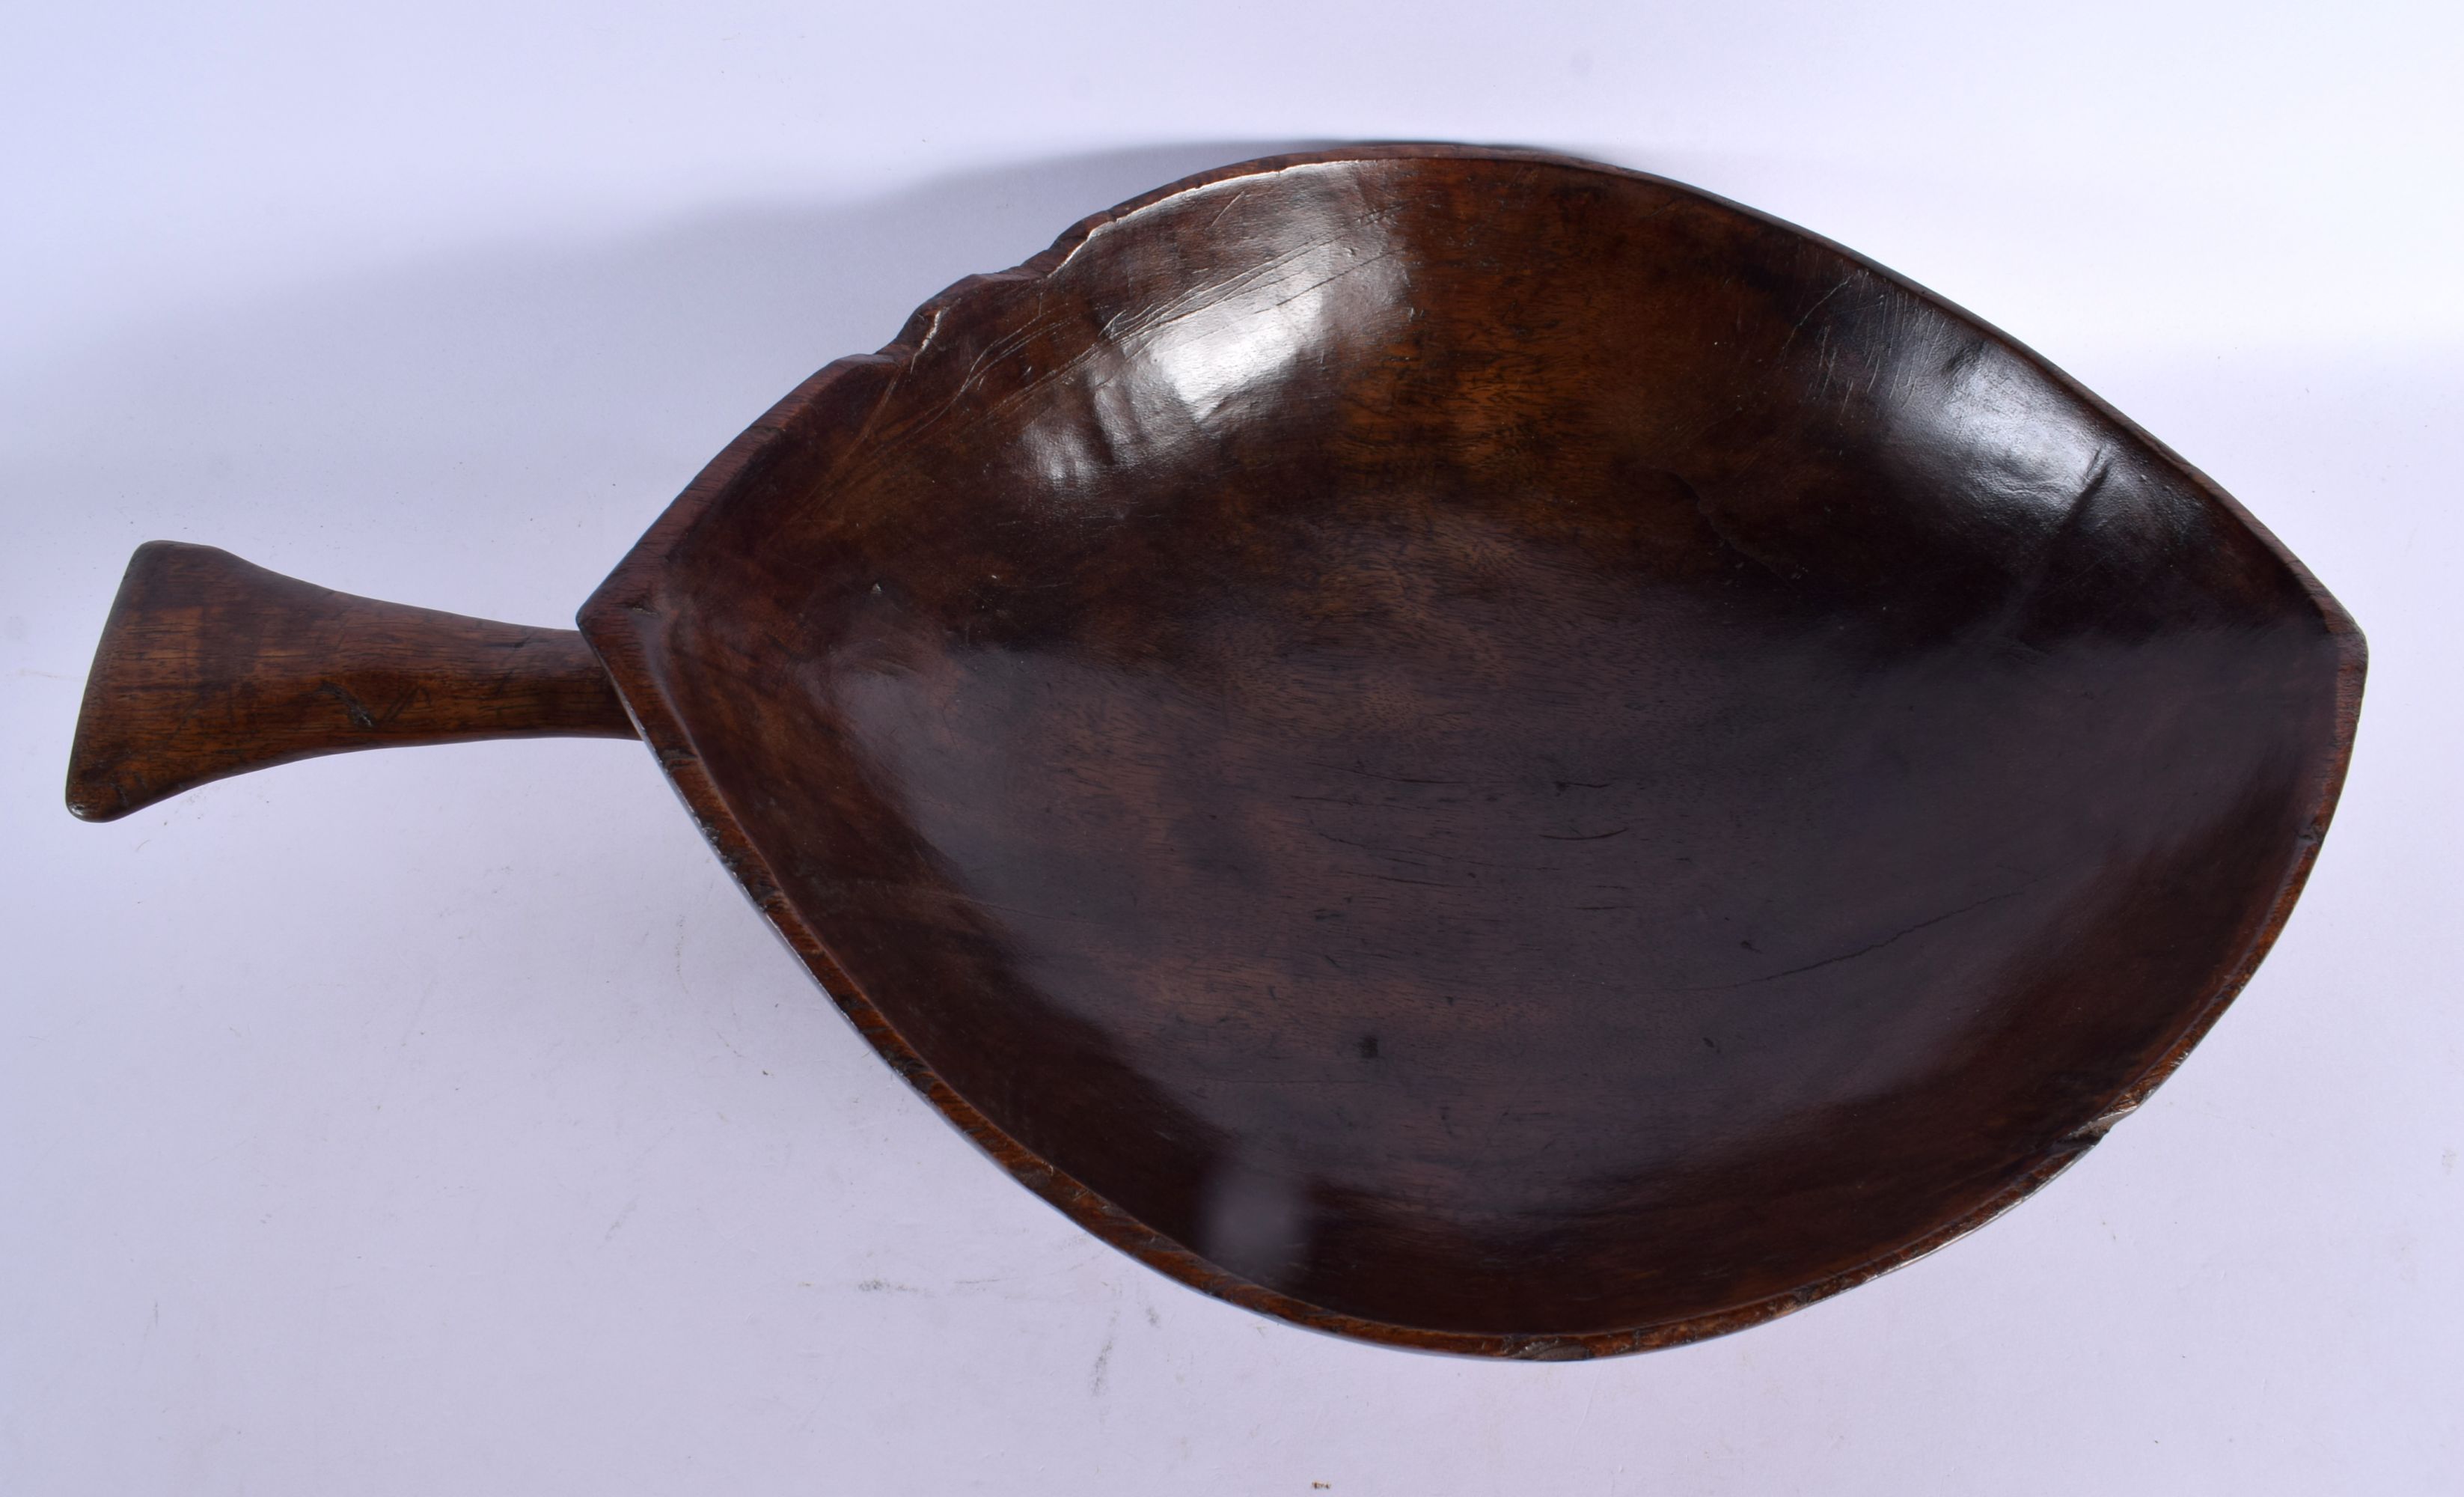 A RARE EARLY 20TH CENTURY TRIBAL CARVED WOOD FISH TAIL HANDLED SERVING BOWL possibly Papua New Guine - Image 3 of 4